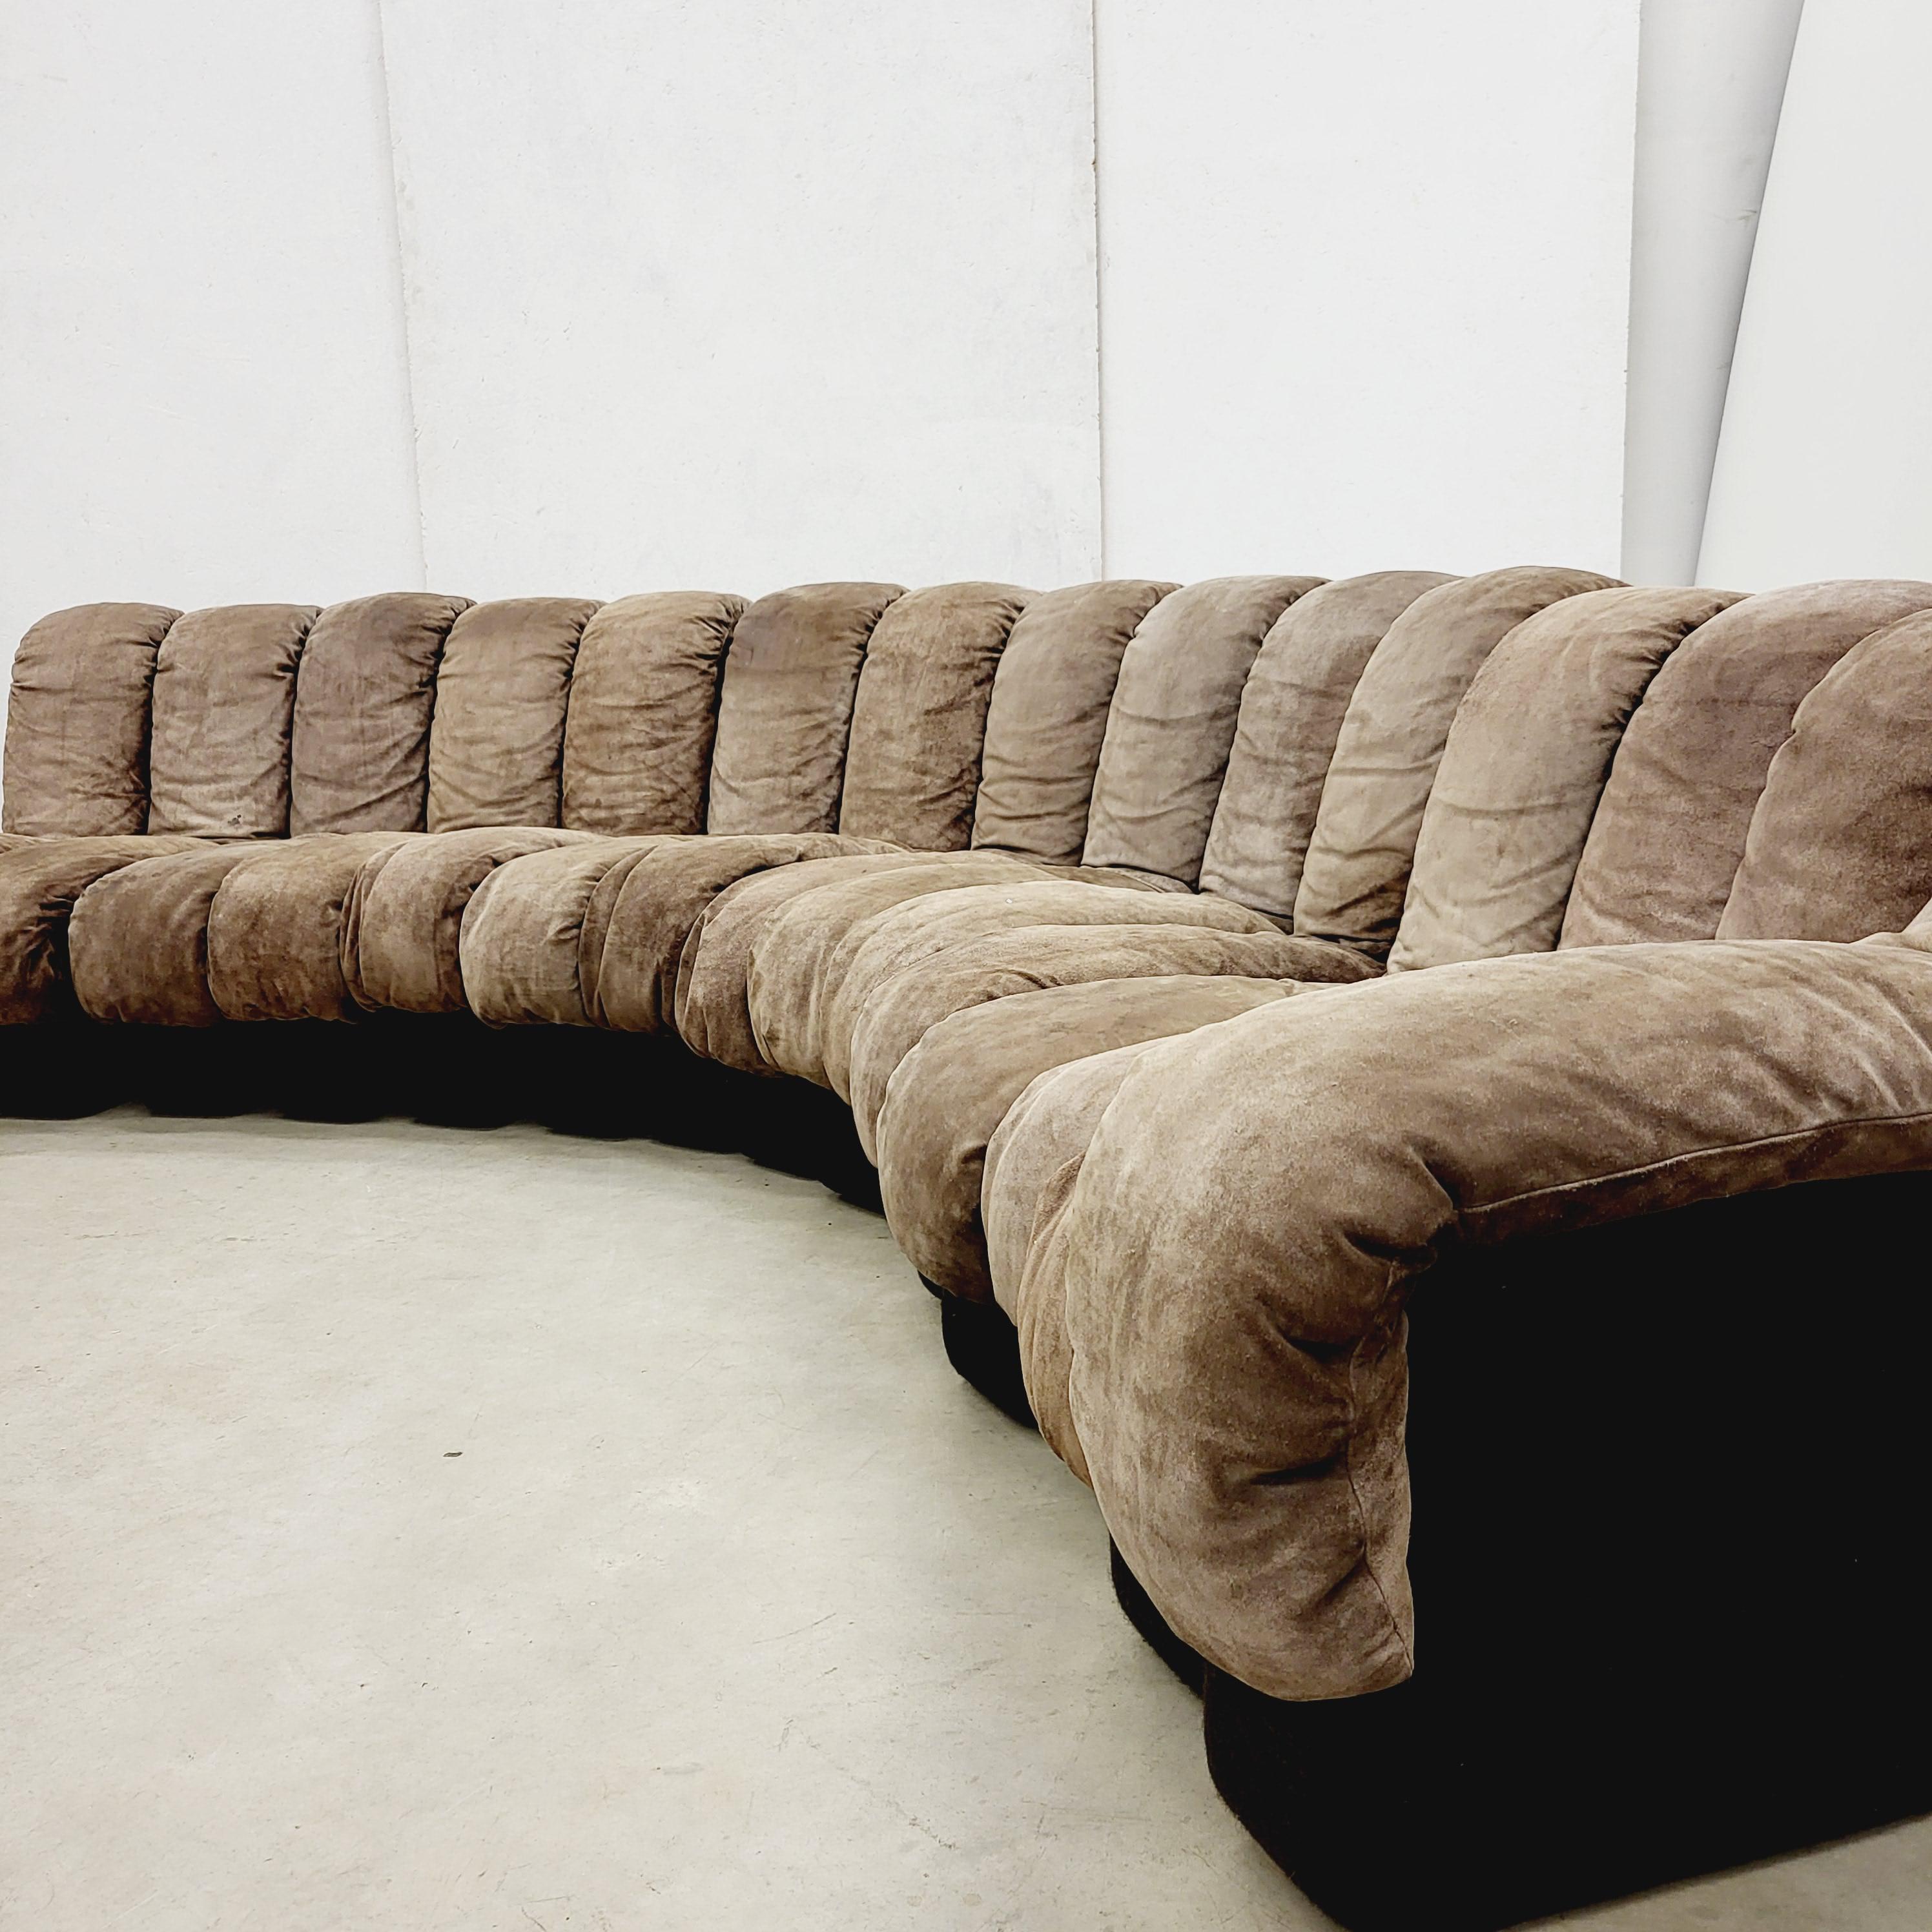 Impressive De Sede DS600 Element sofa by Ueli Berger & Riva.
Designed in 1972, this rare soft suede edition includes 15 elements and comes from an earlier production.
The elements are connected with a plug-in hinge and a construction made of hide